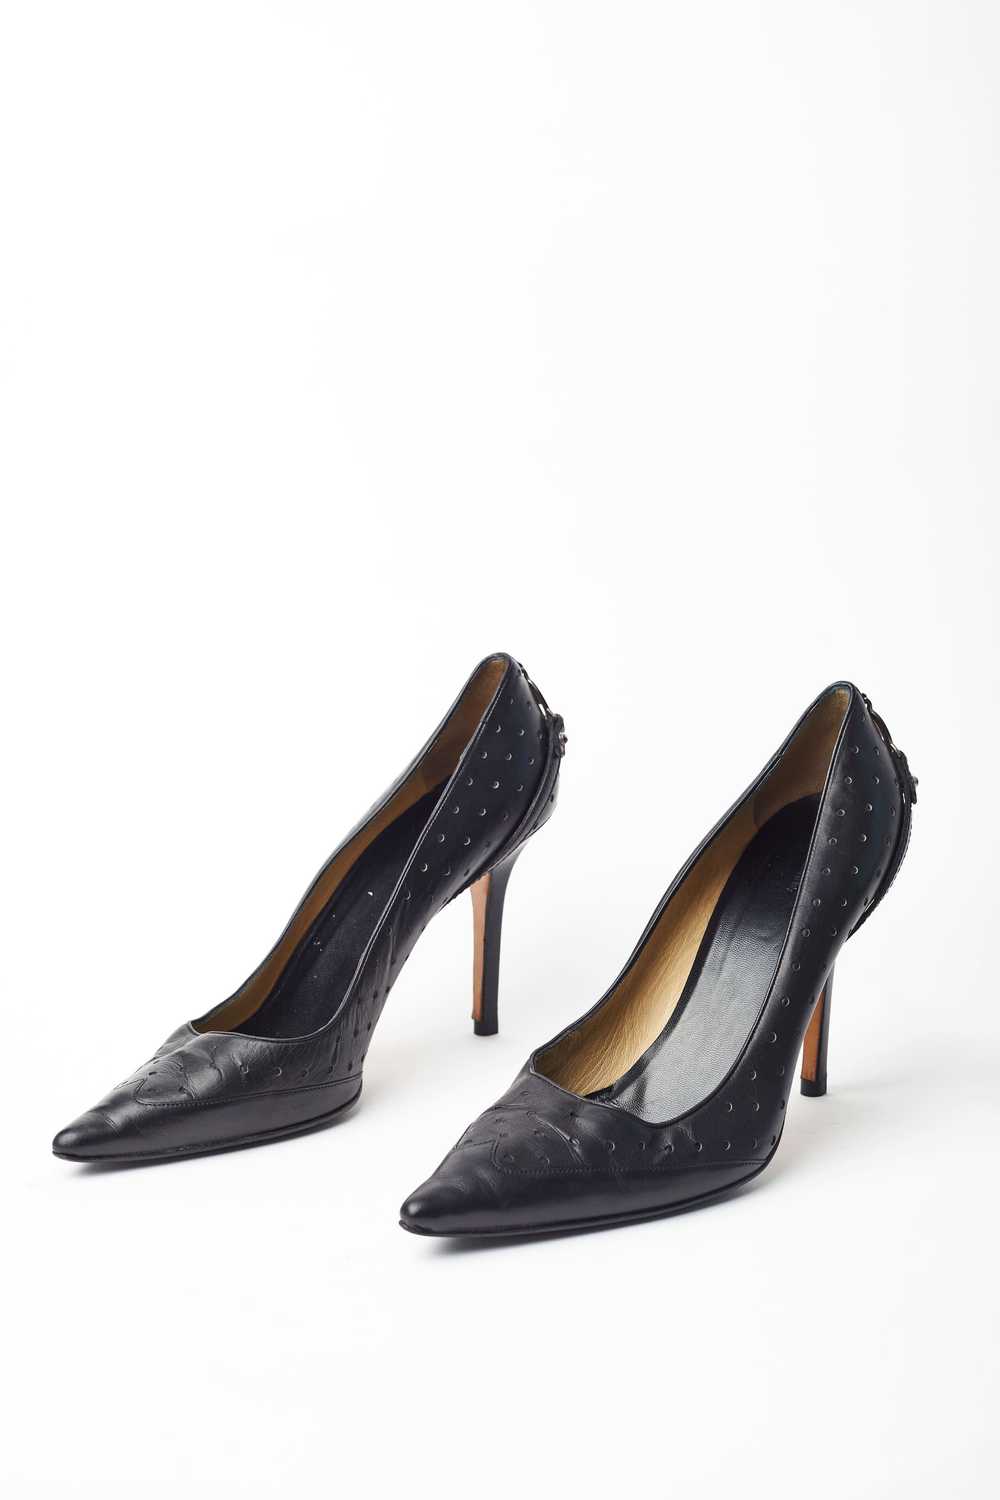 Gucci Y2K Tom Ford perforated leather logo pumps - image 6